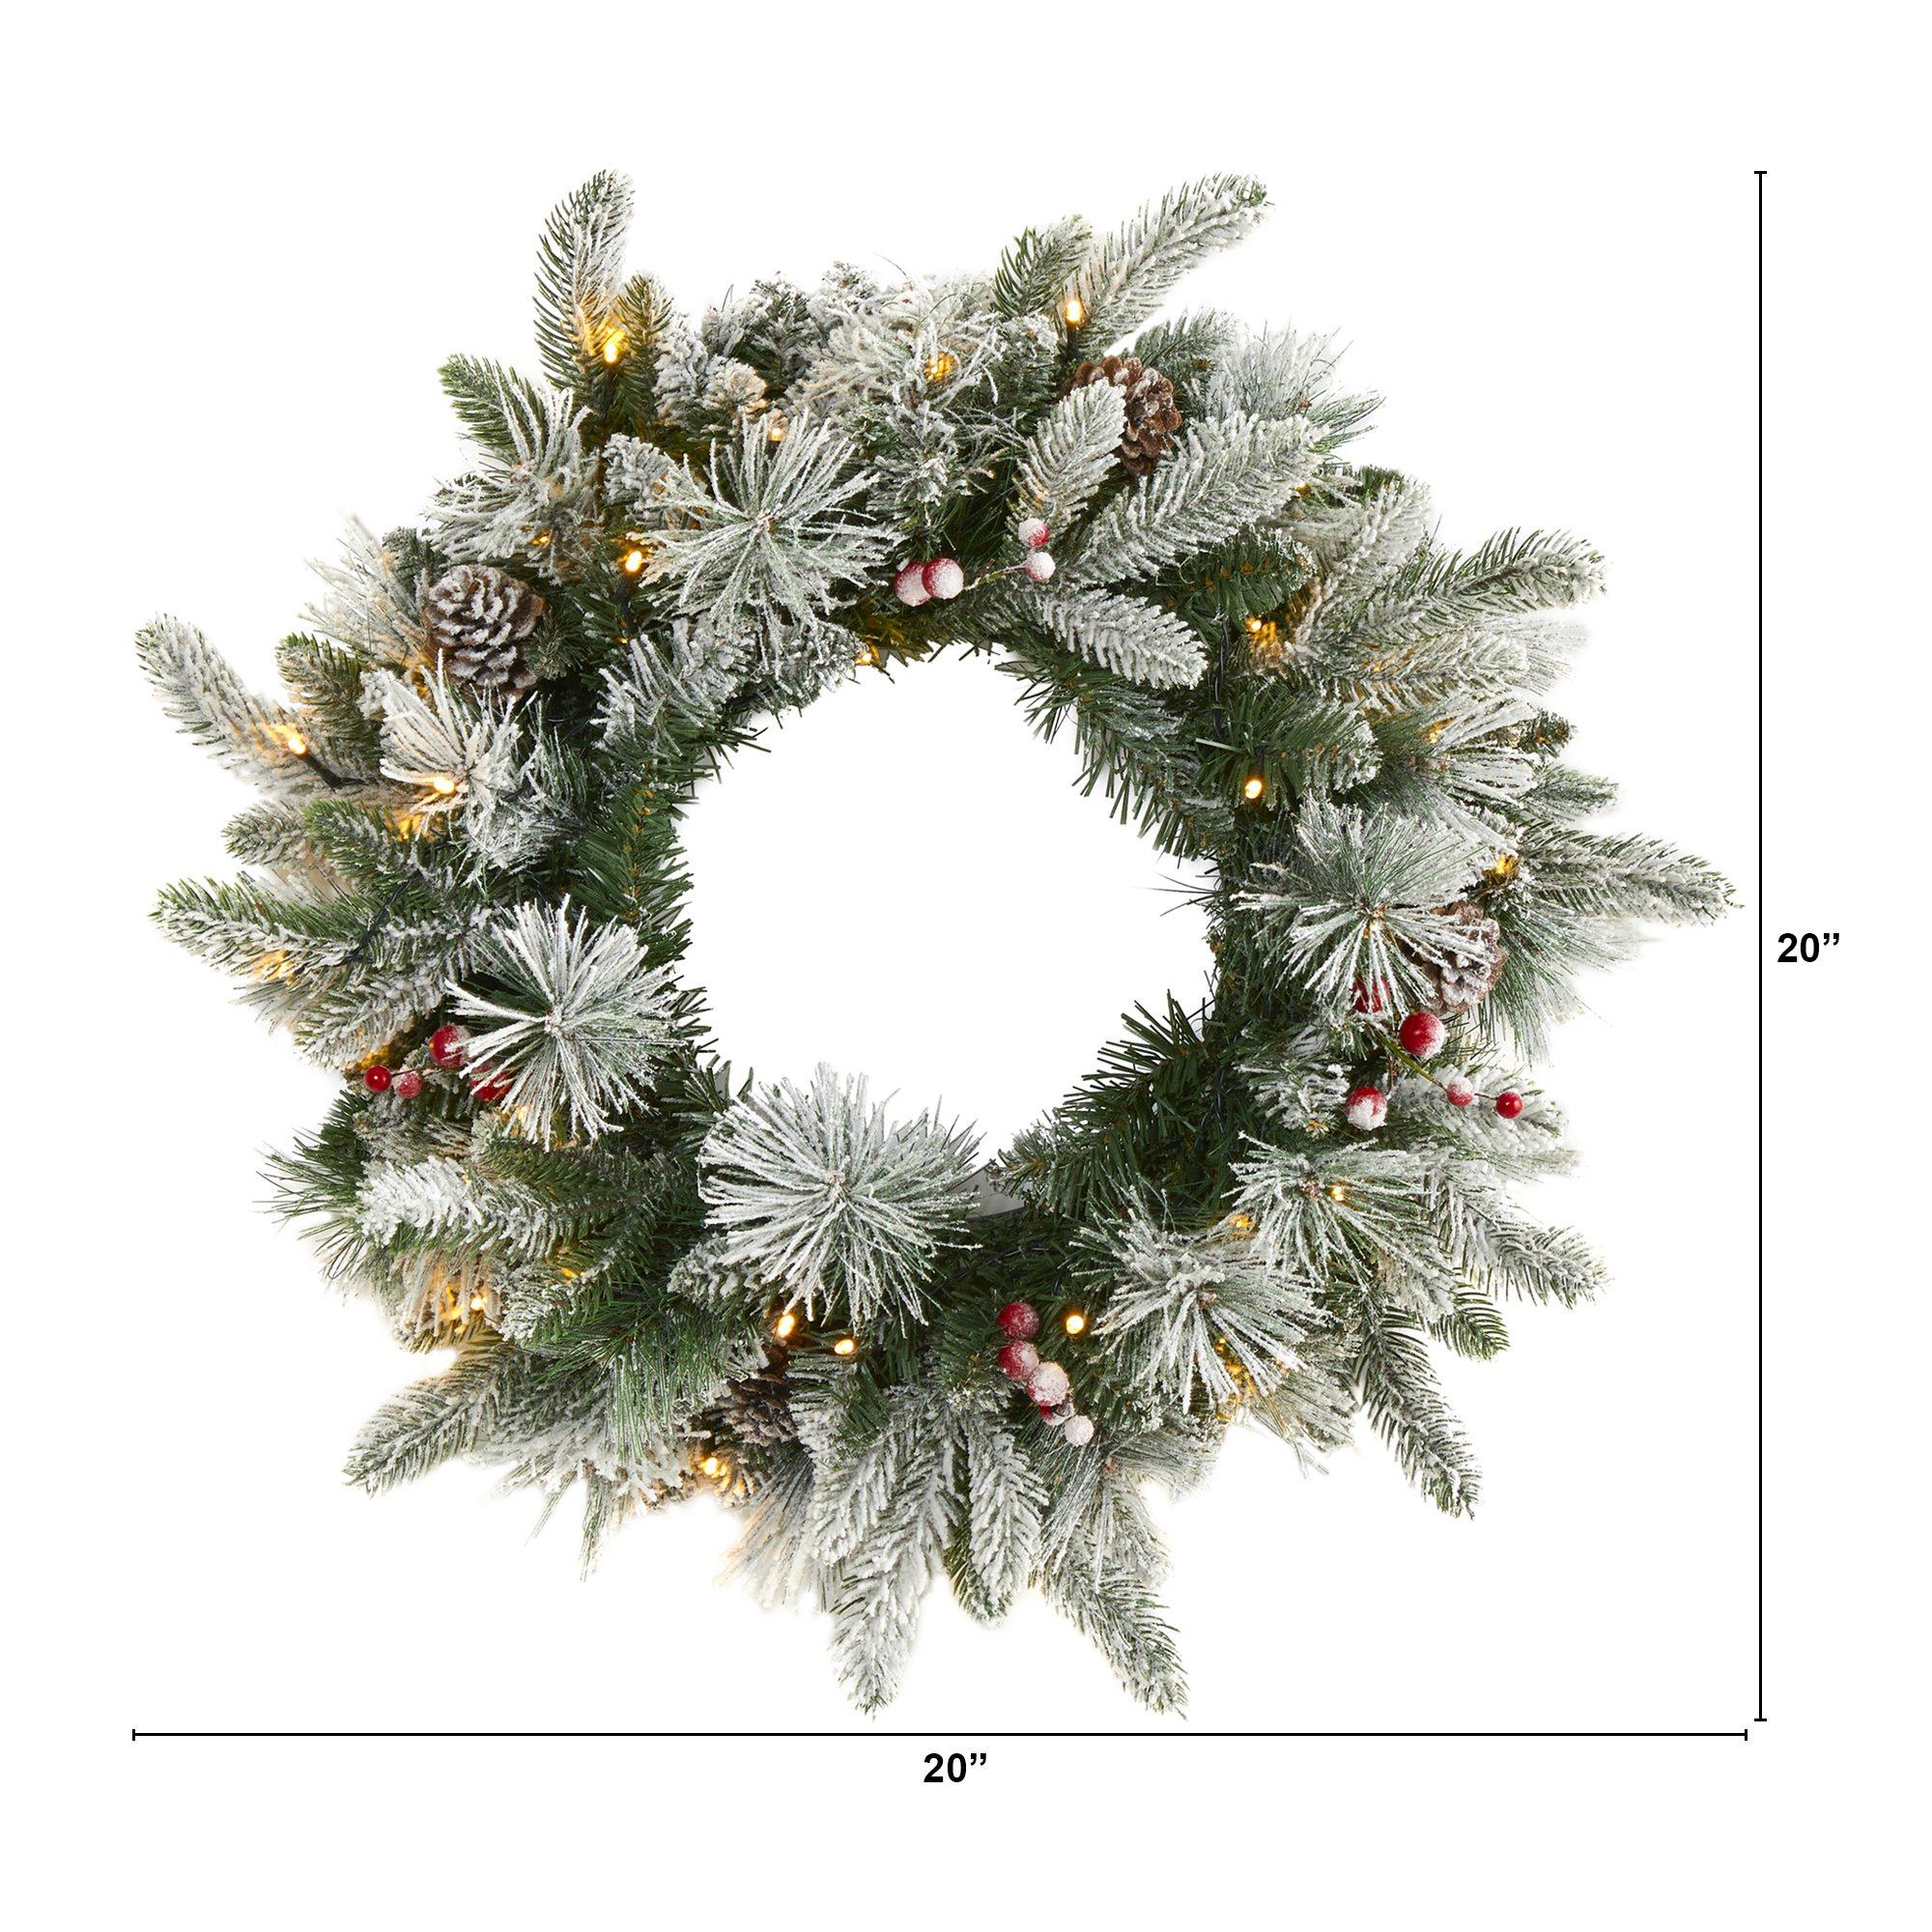 20” Flocked Mixed Pine Artificial Christmas Wreath with 50 LED Lights ...